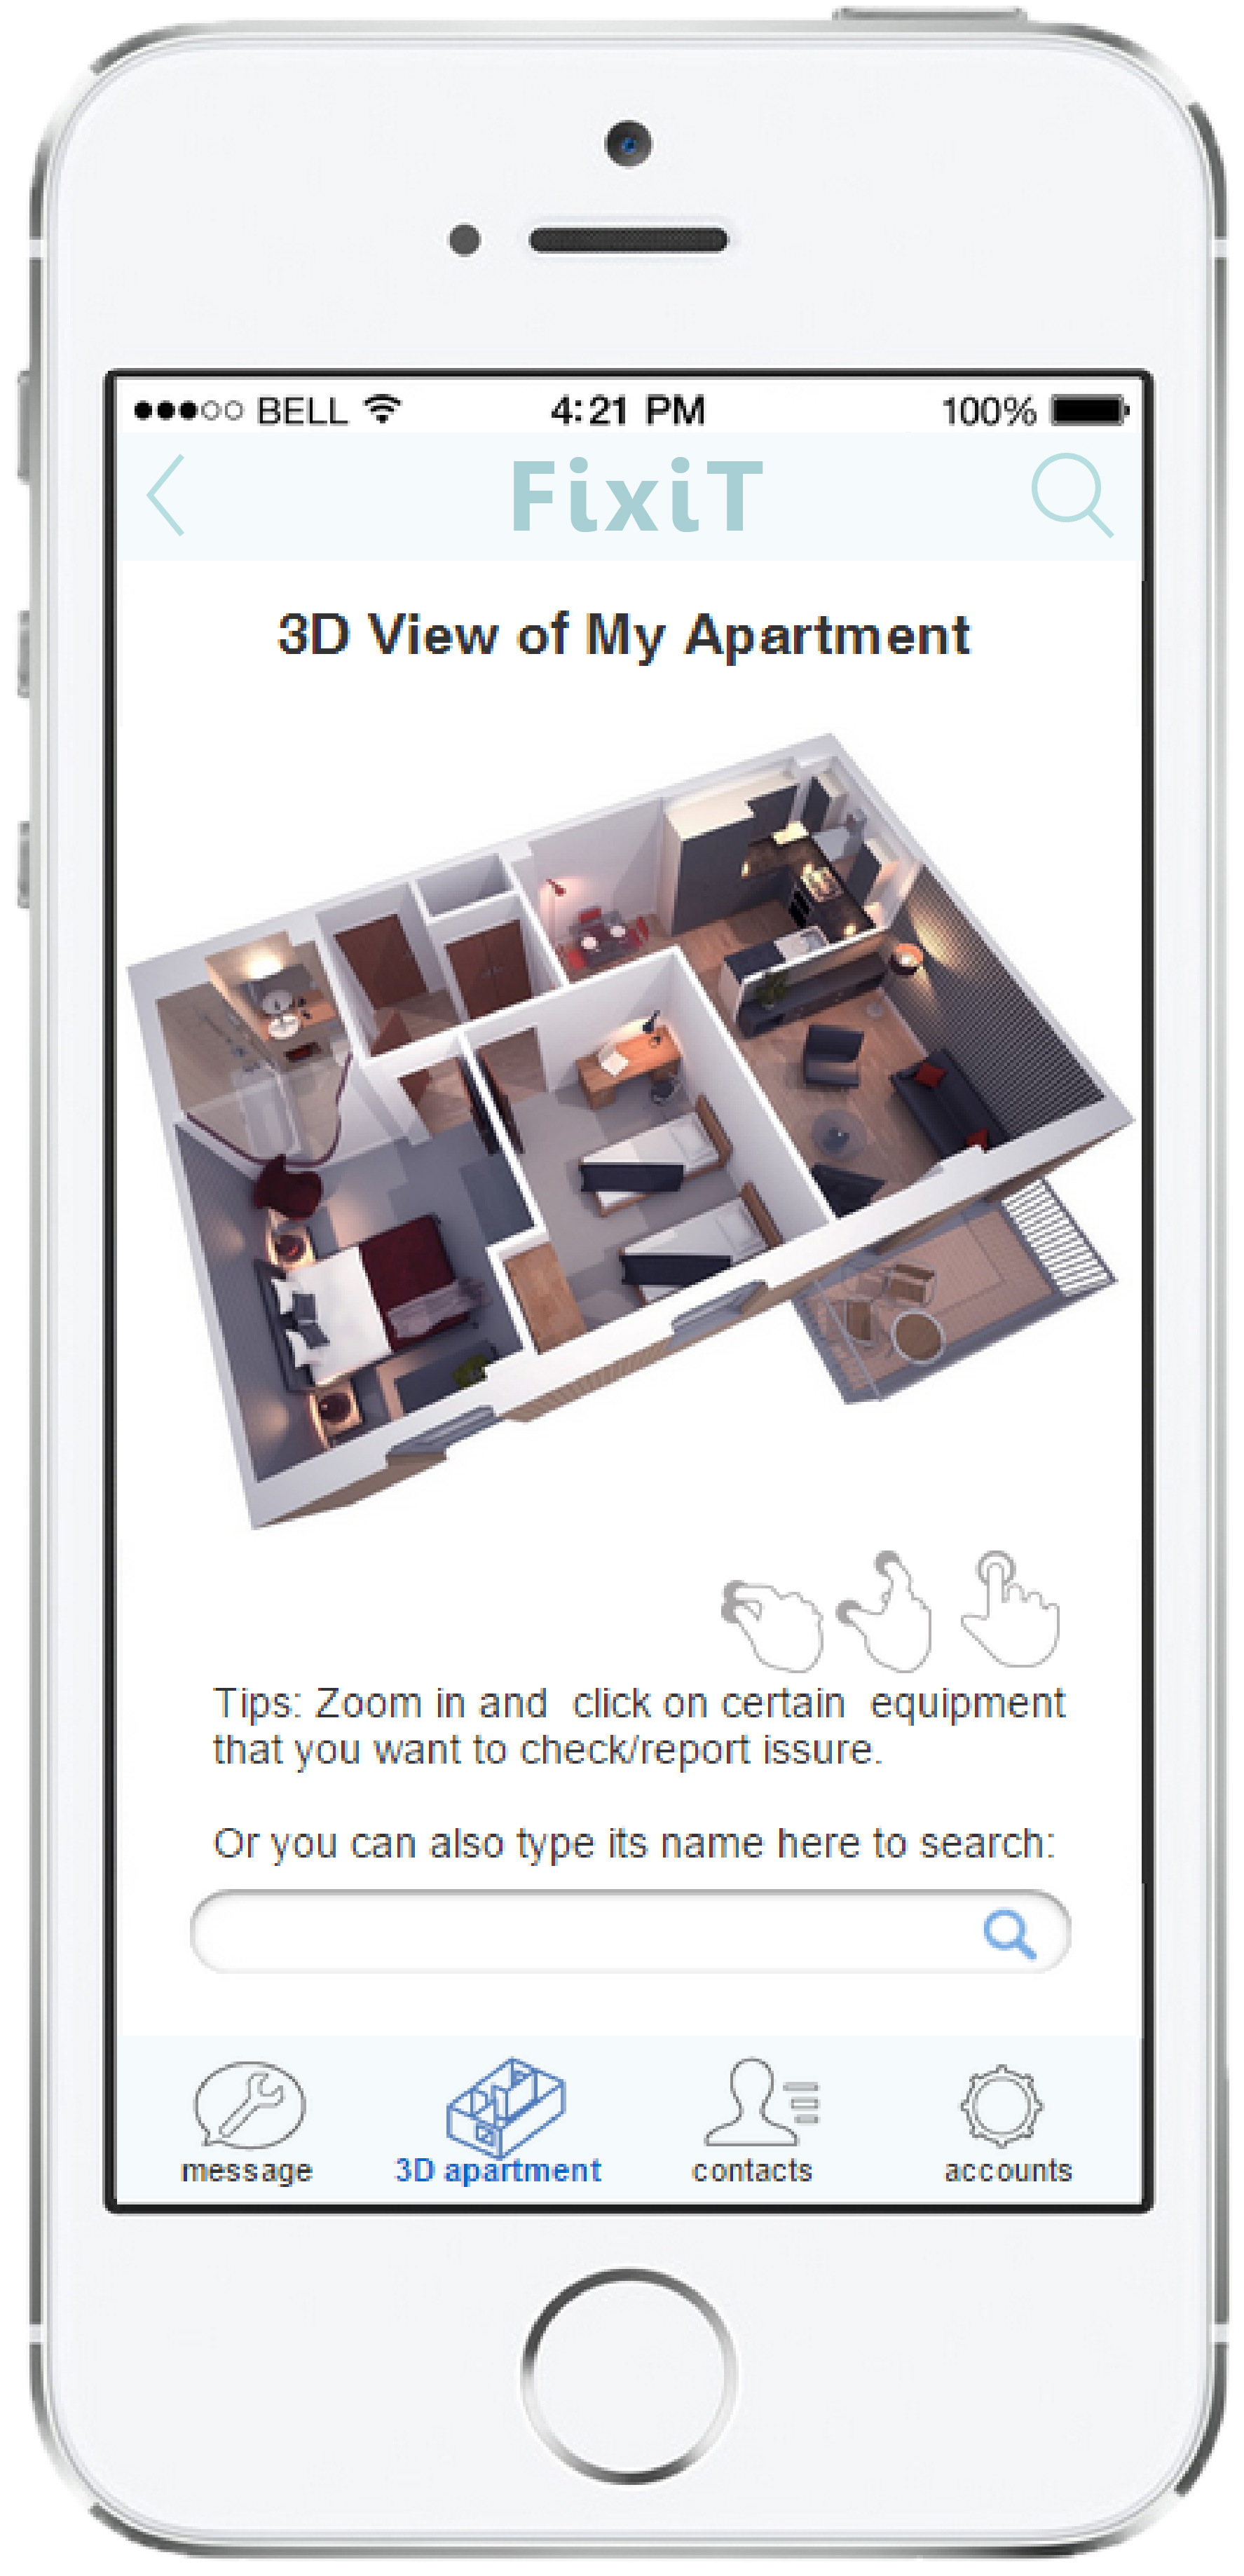 mobile app interface for 3D apartment